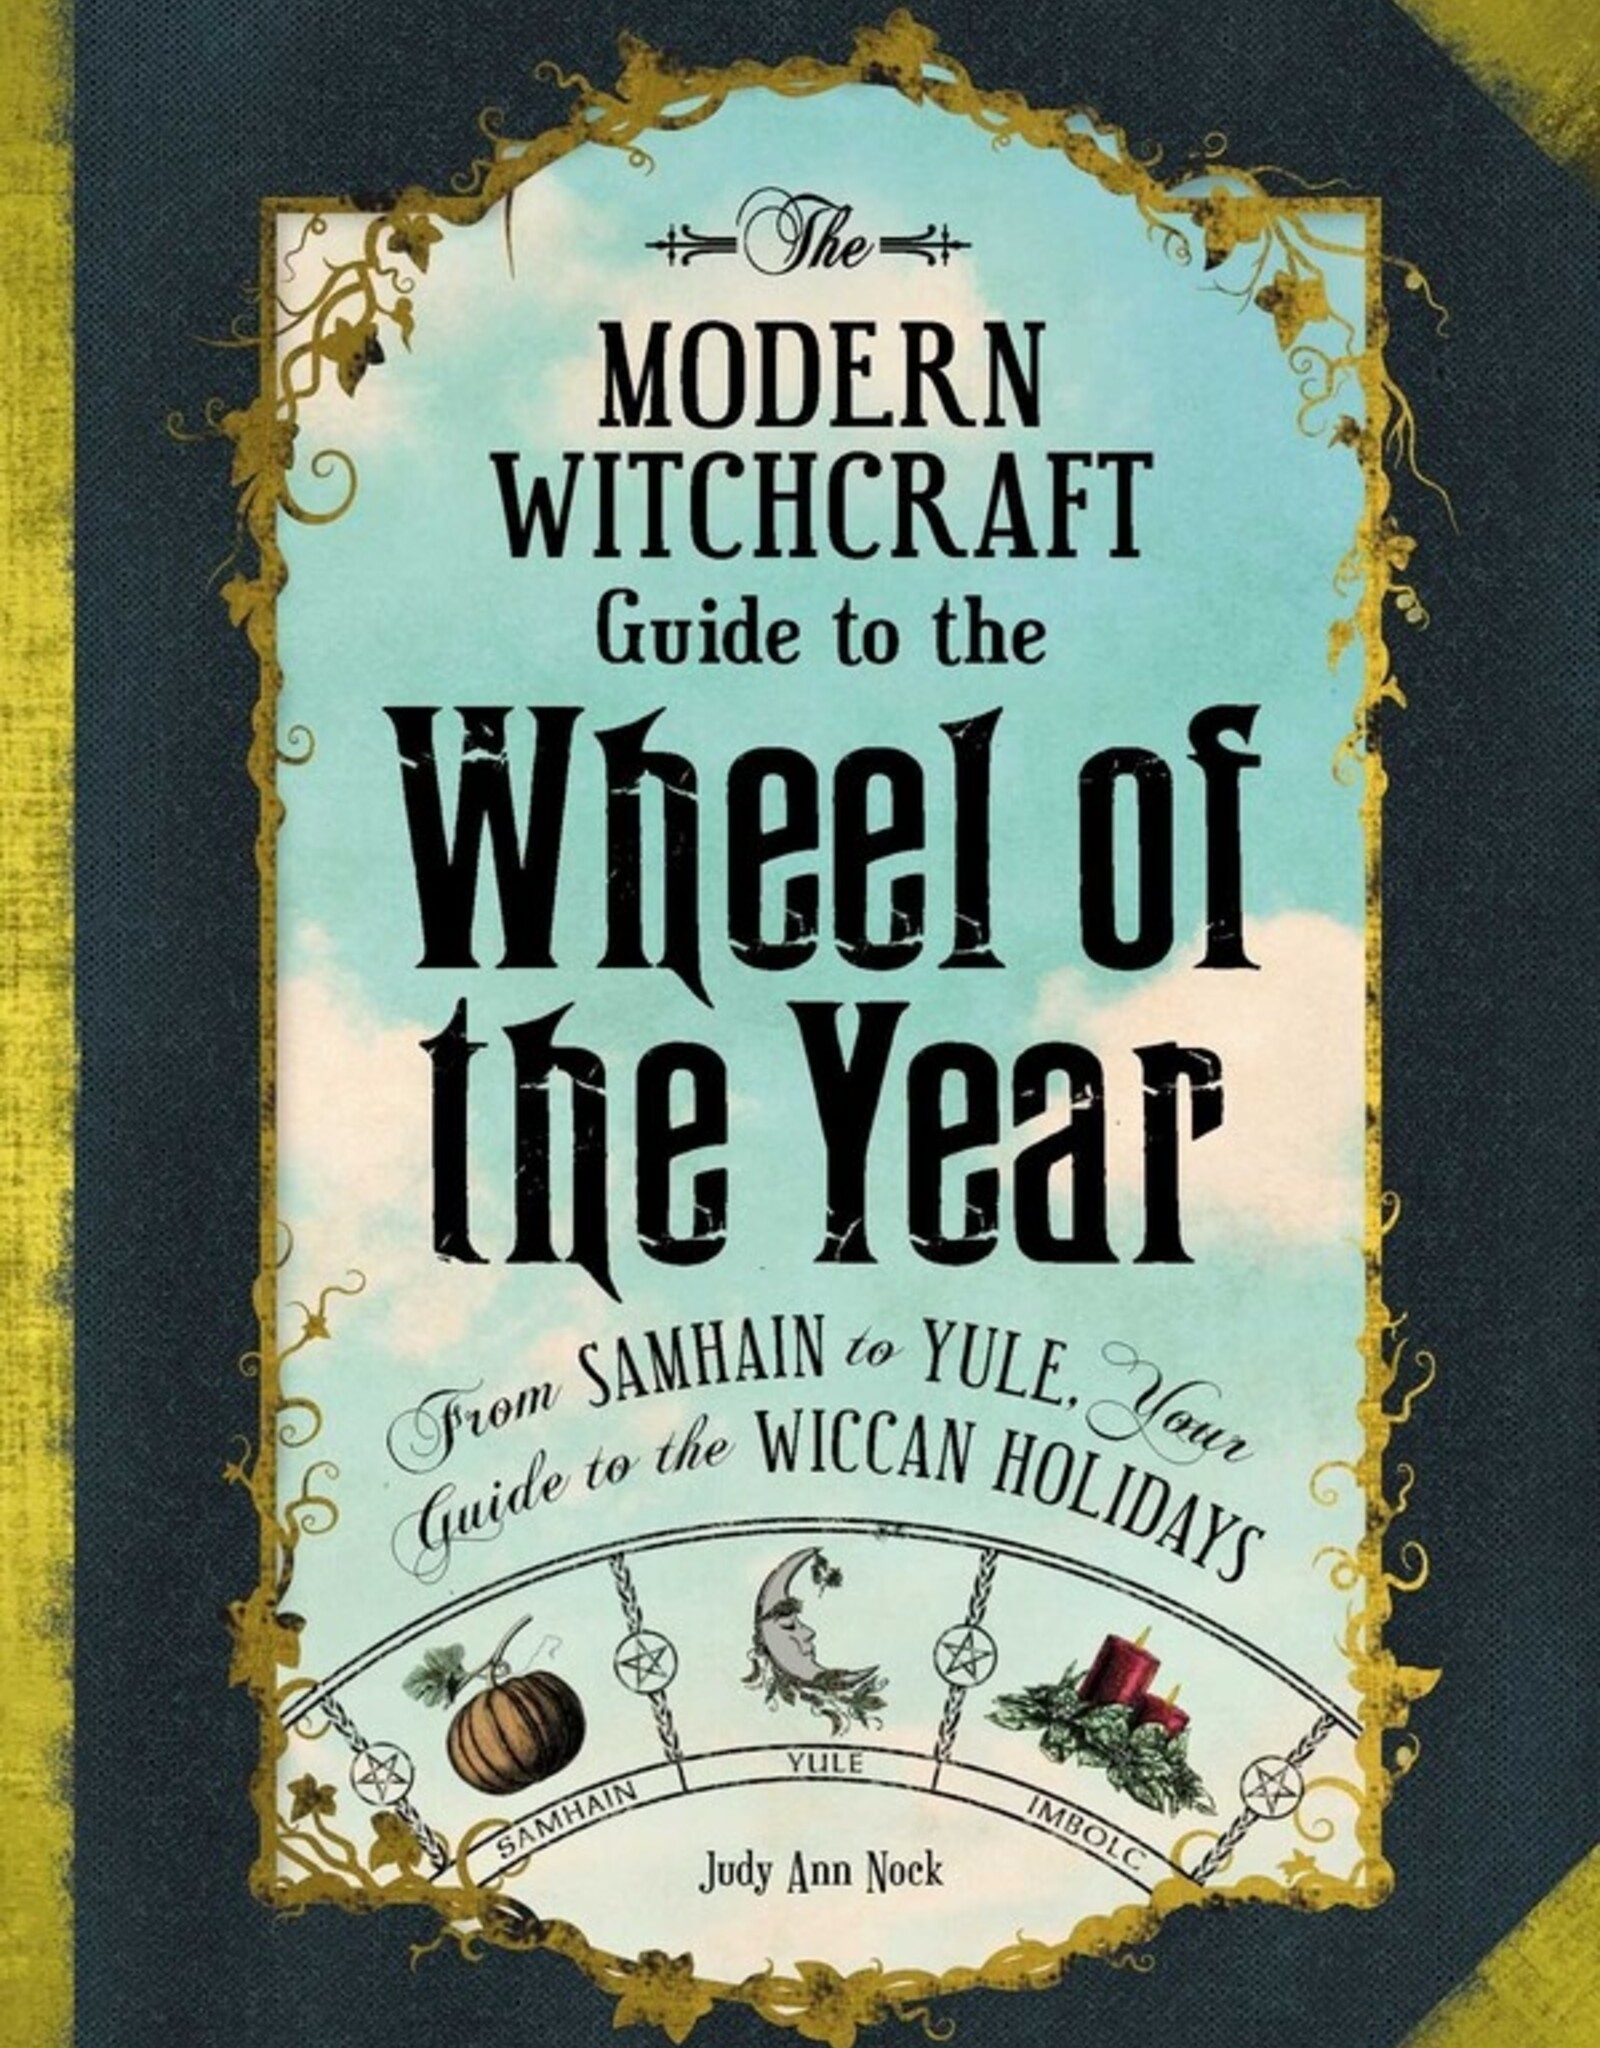 Simon & Schuster The Modern Witchcraft Guide to the Wheel of the Year